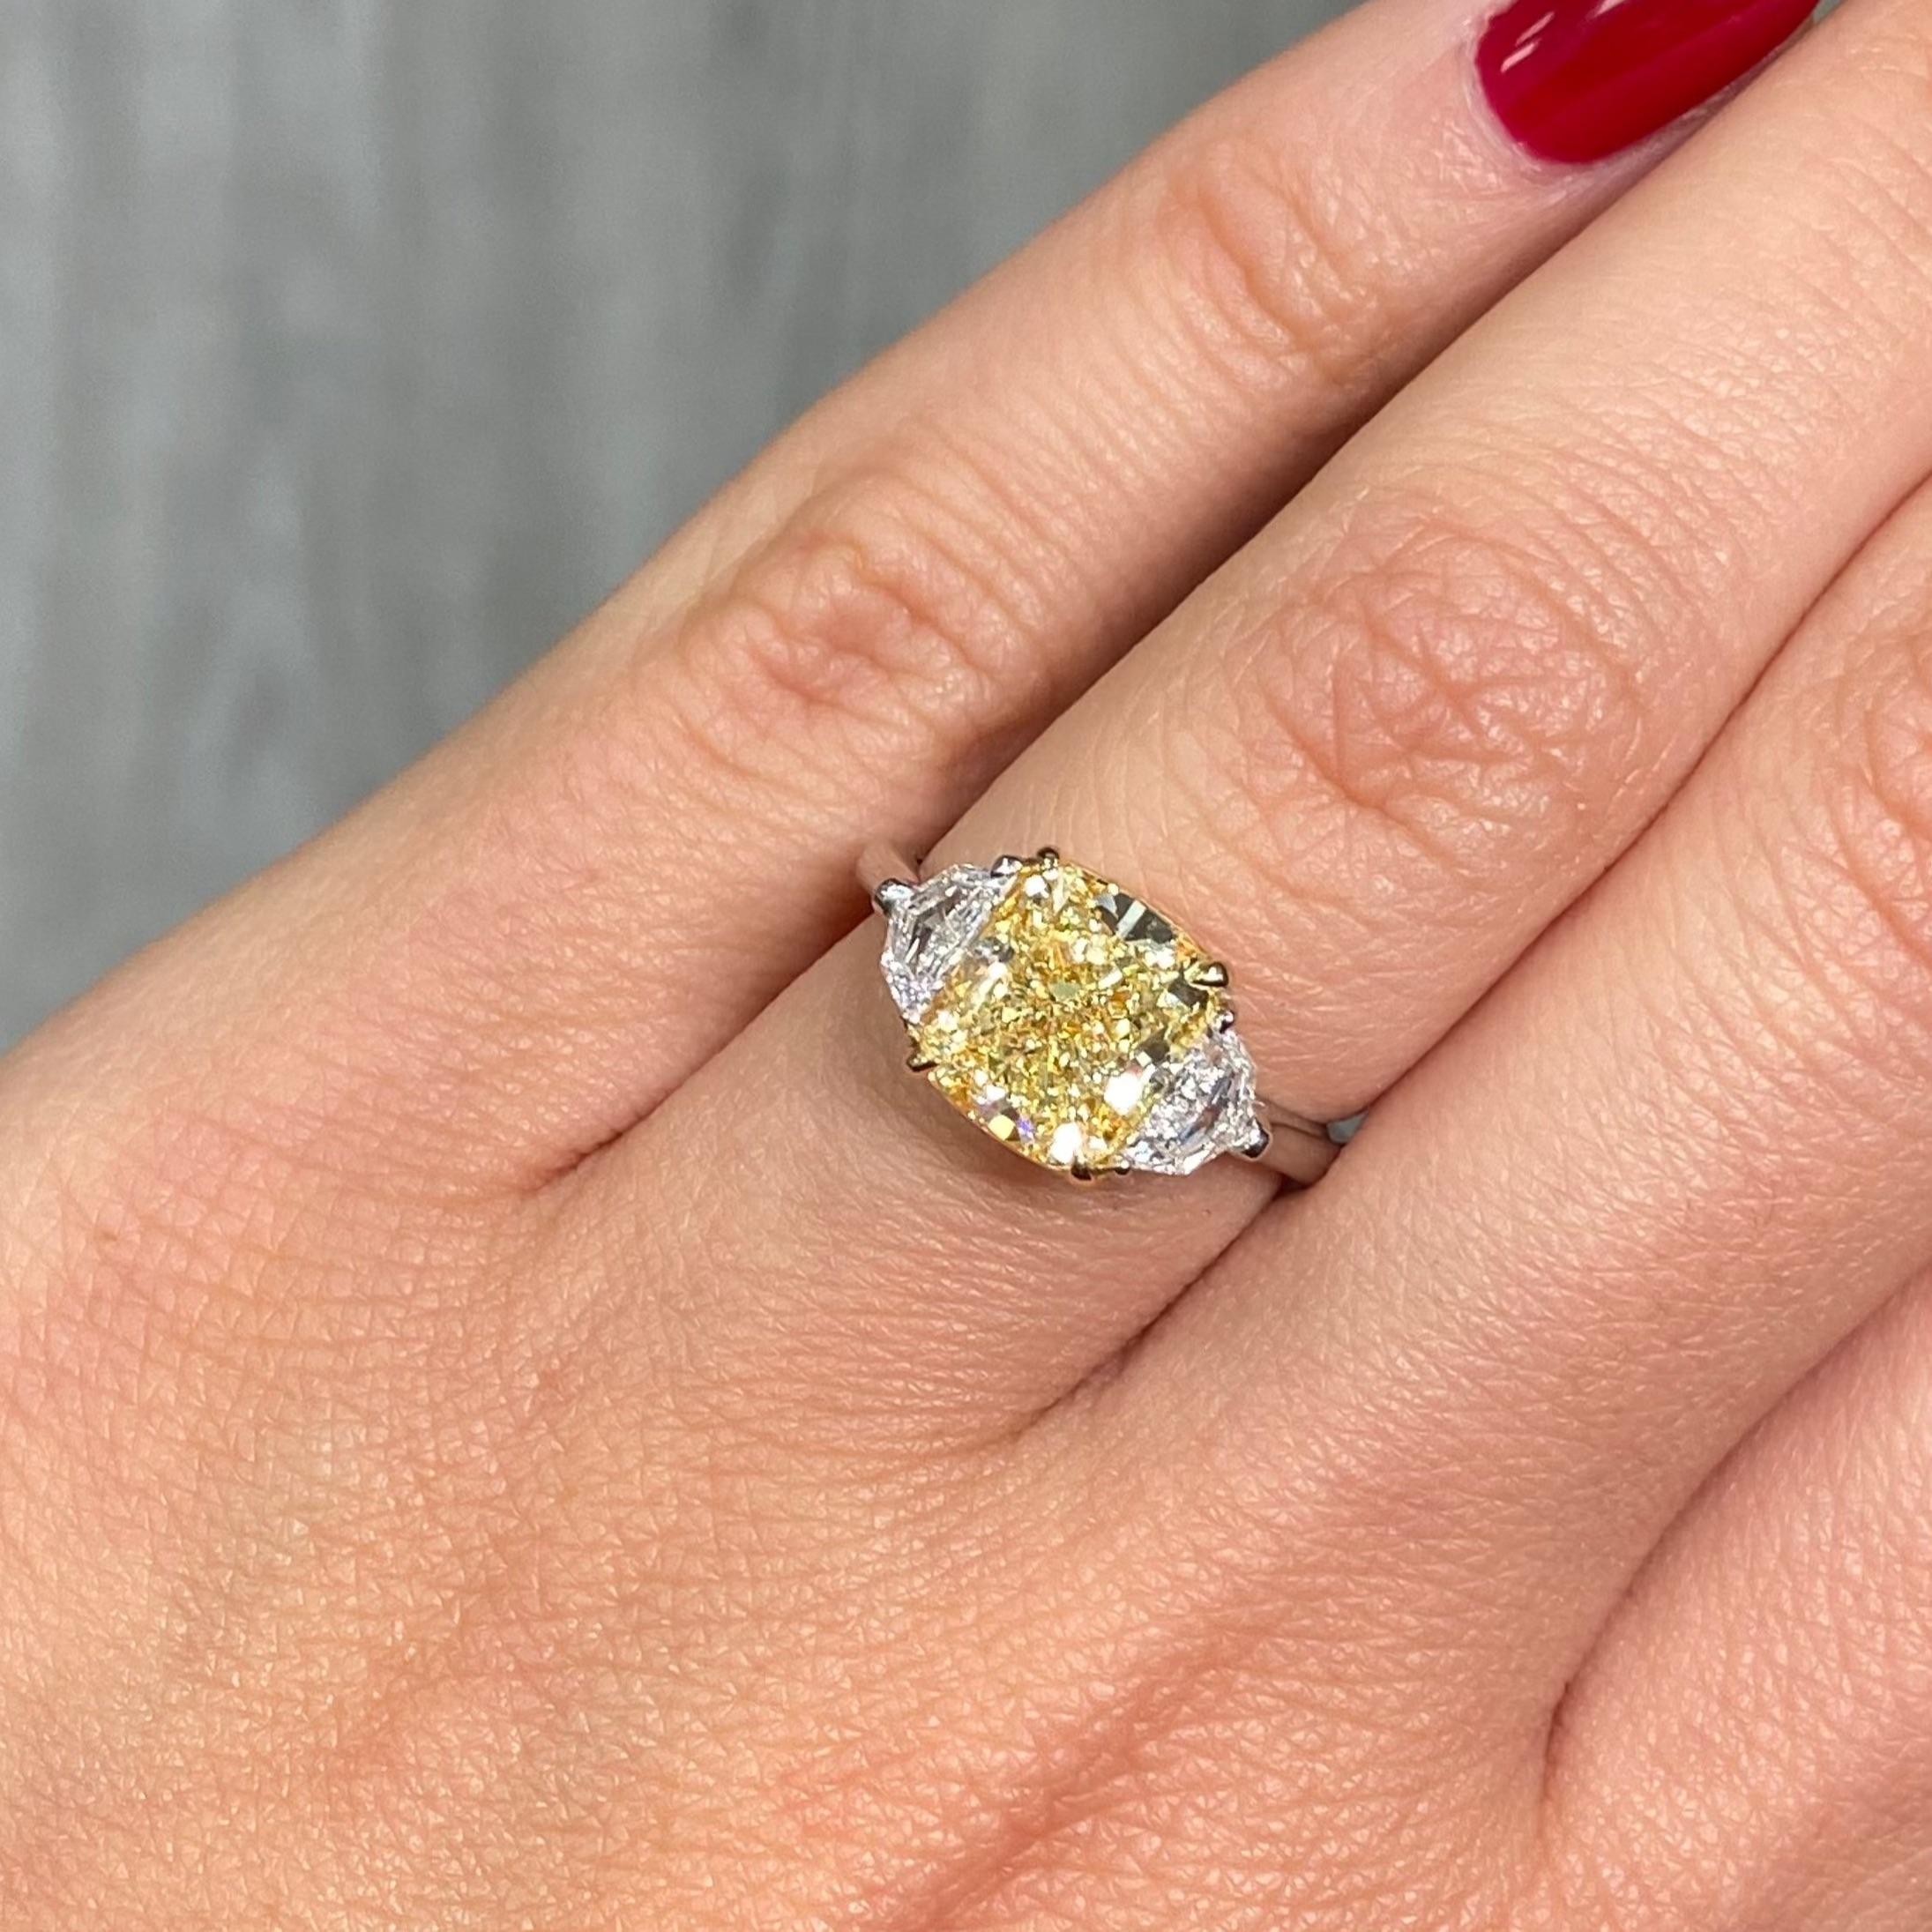 As much as all yellow diamonds want to look like the sun- this one really does. Absolutely dripping with color, no patches of emptiness in the stone; completely vibrant and beautiful

Set in Platinum and 18kt Yellow Gold with 0.58ct of